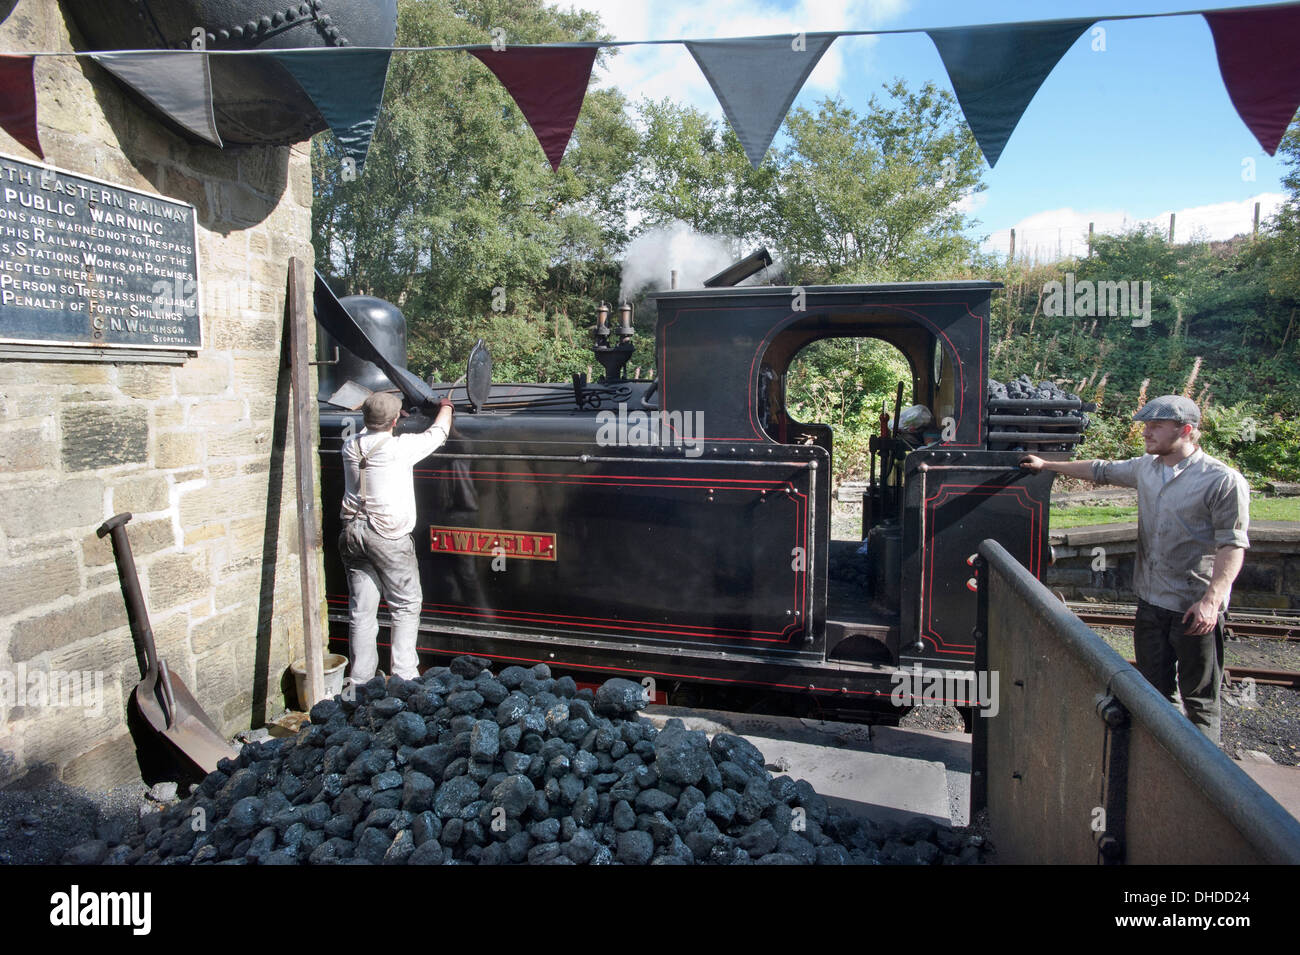 The fireman of former Coal Board tank engine steam locomotive Number 3 'Twizell' fills tanks with water as the driver looks on at Andrews House station on the Tanfield Railway, The Worlds Oldest Railway- Horse drawn, in County Durham. Stock Photo